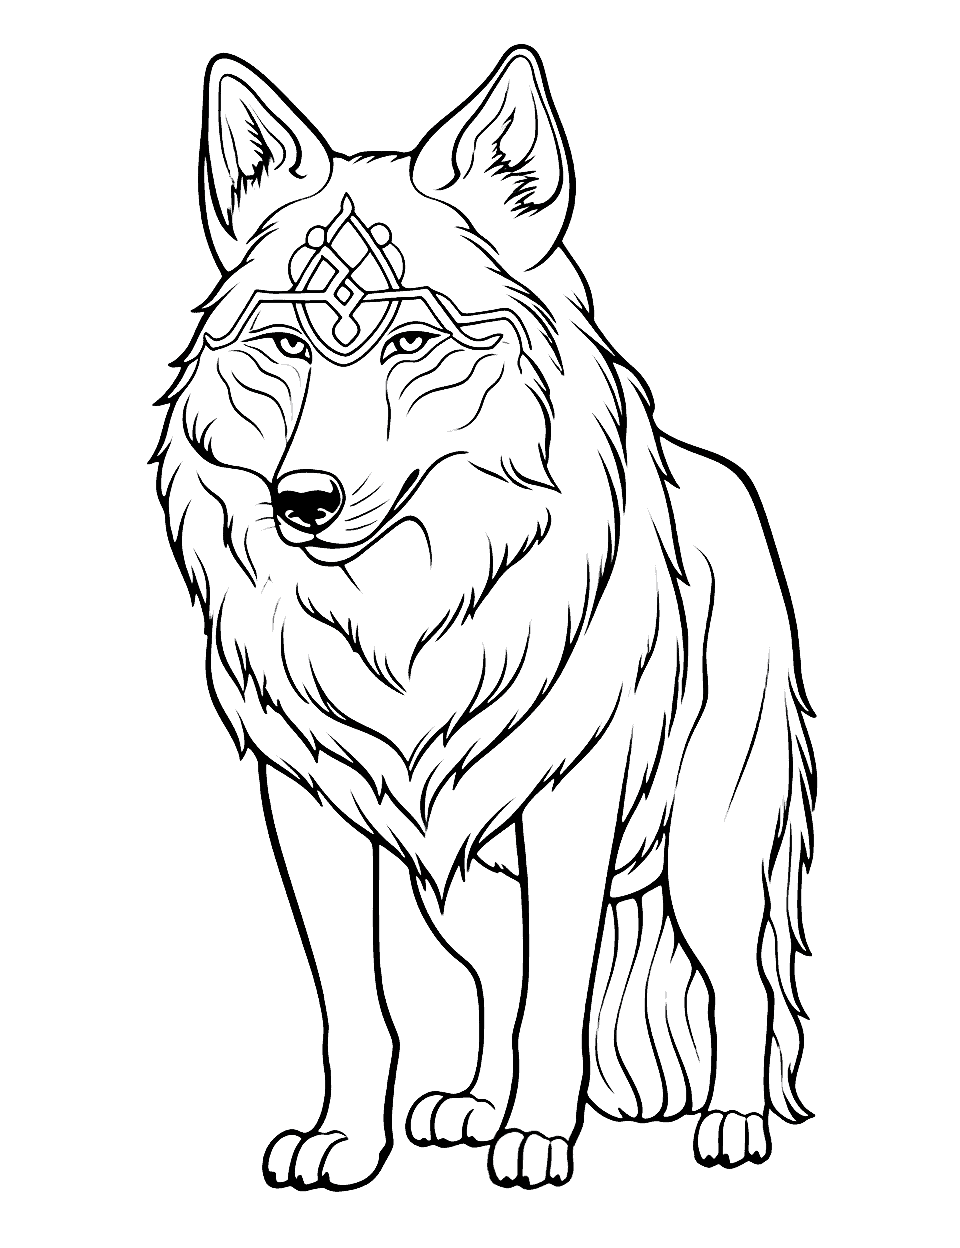 She Wolf Queen Coloring Page - A regal female wolf adorned with a crown surveying her forest kingdom.